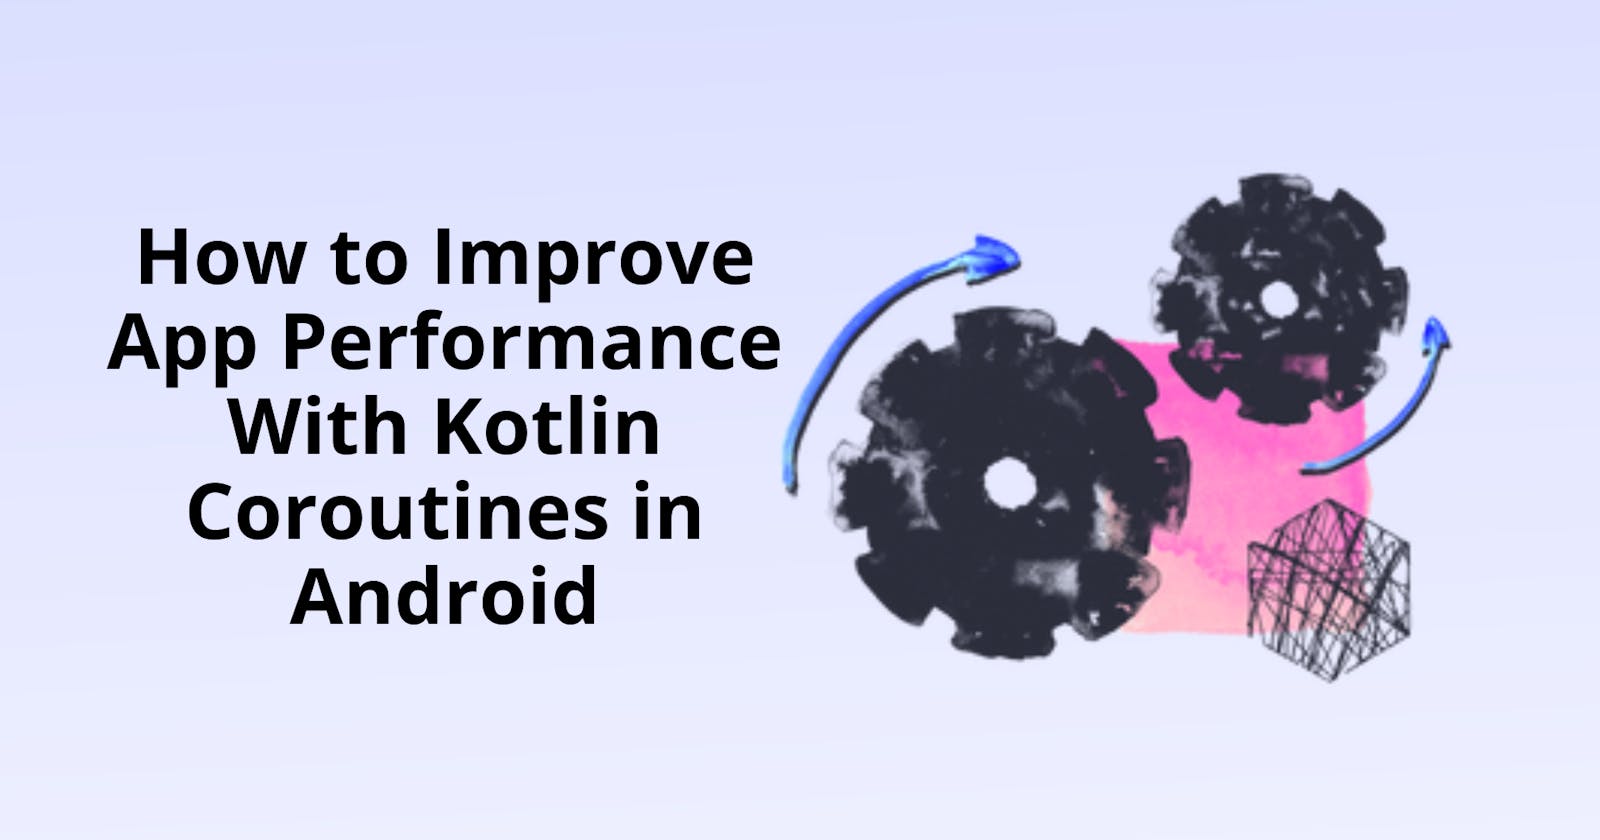 How to Improve App Performance With Kotlin Coroutines in Android